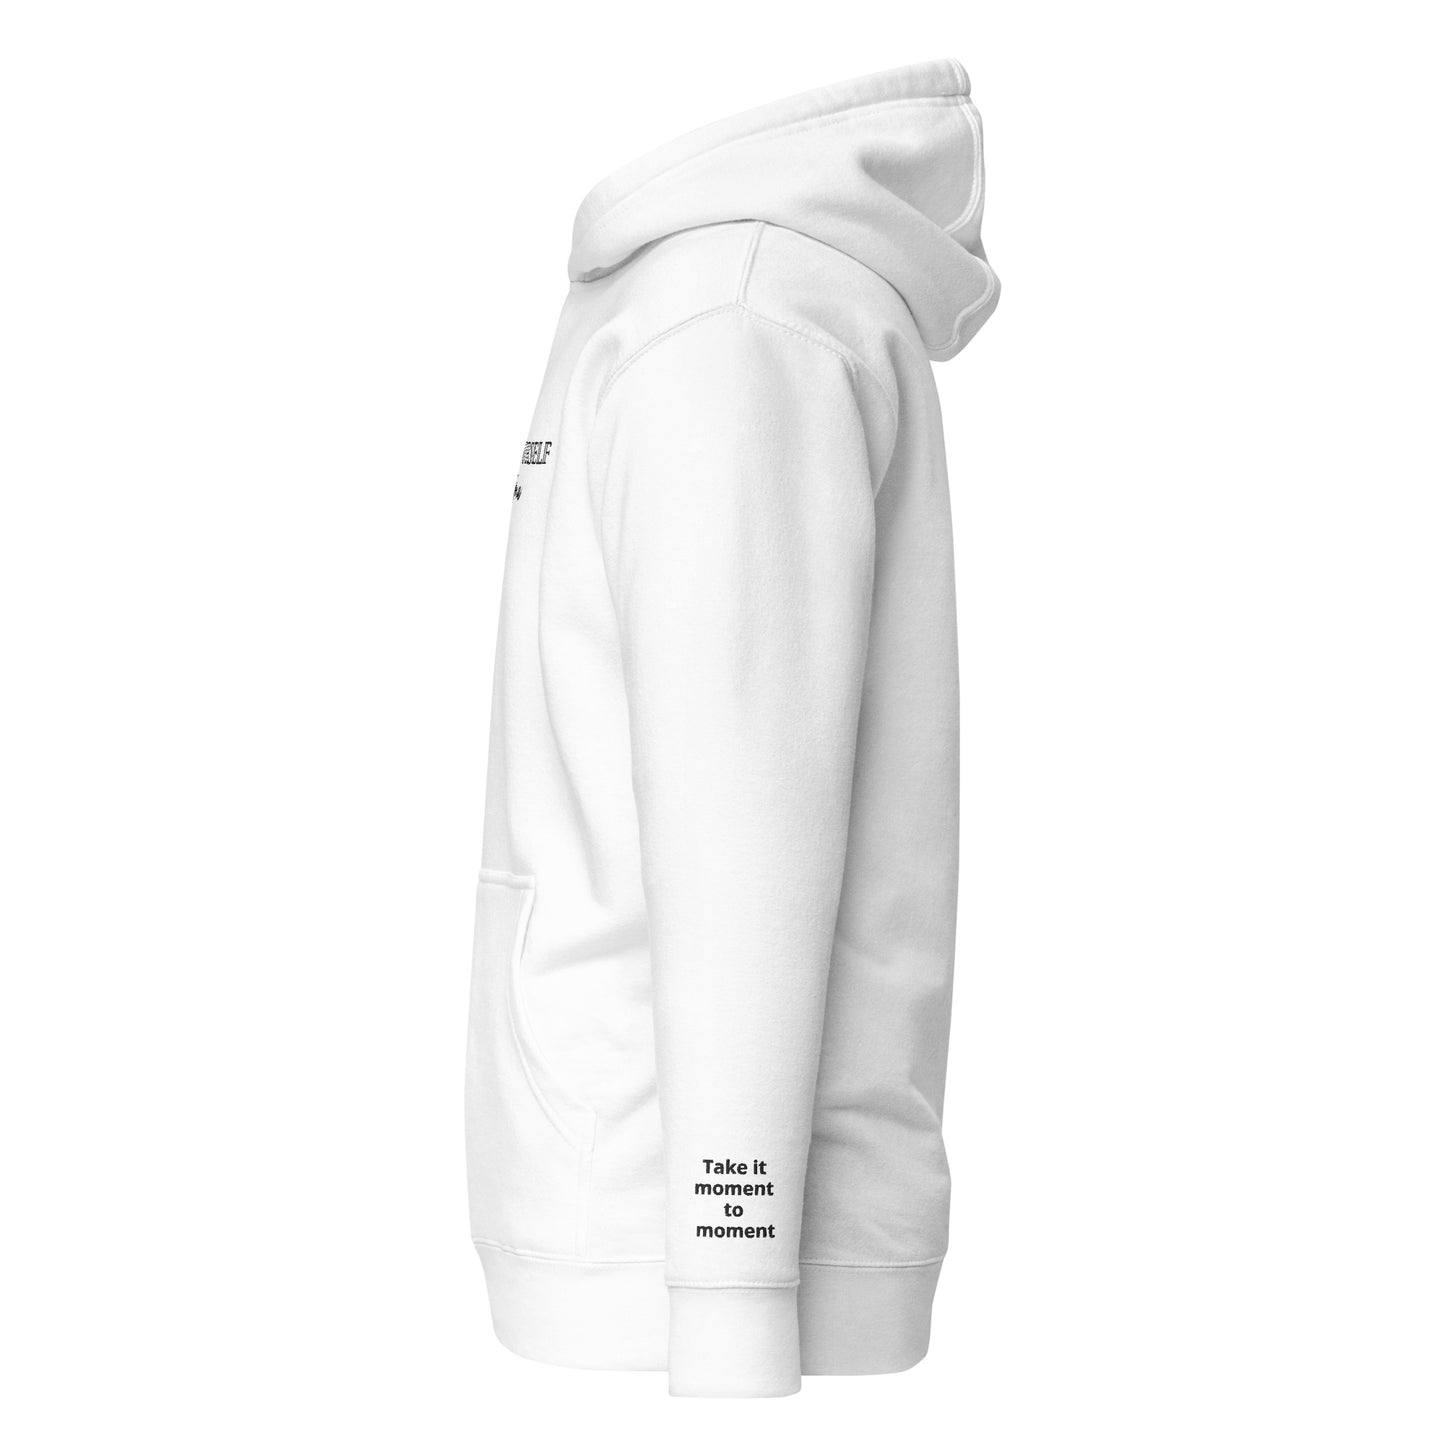 Be Patient With Yourself Hoodie